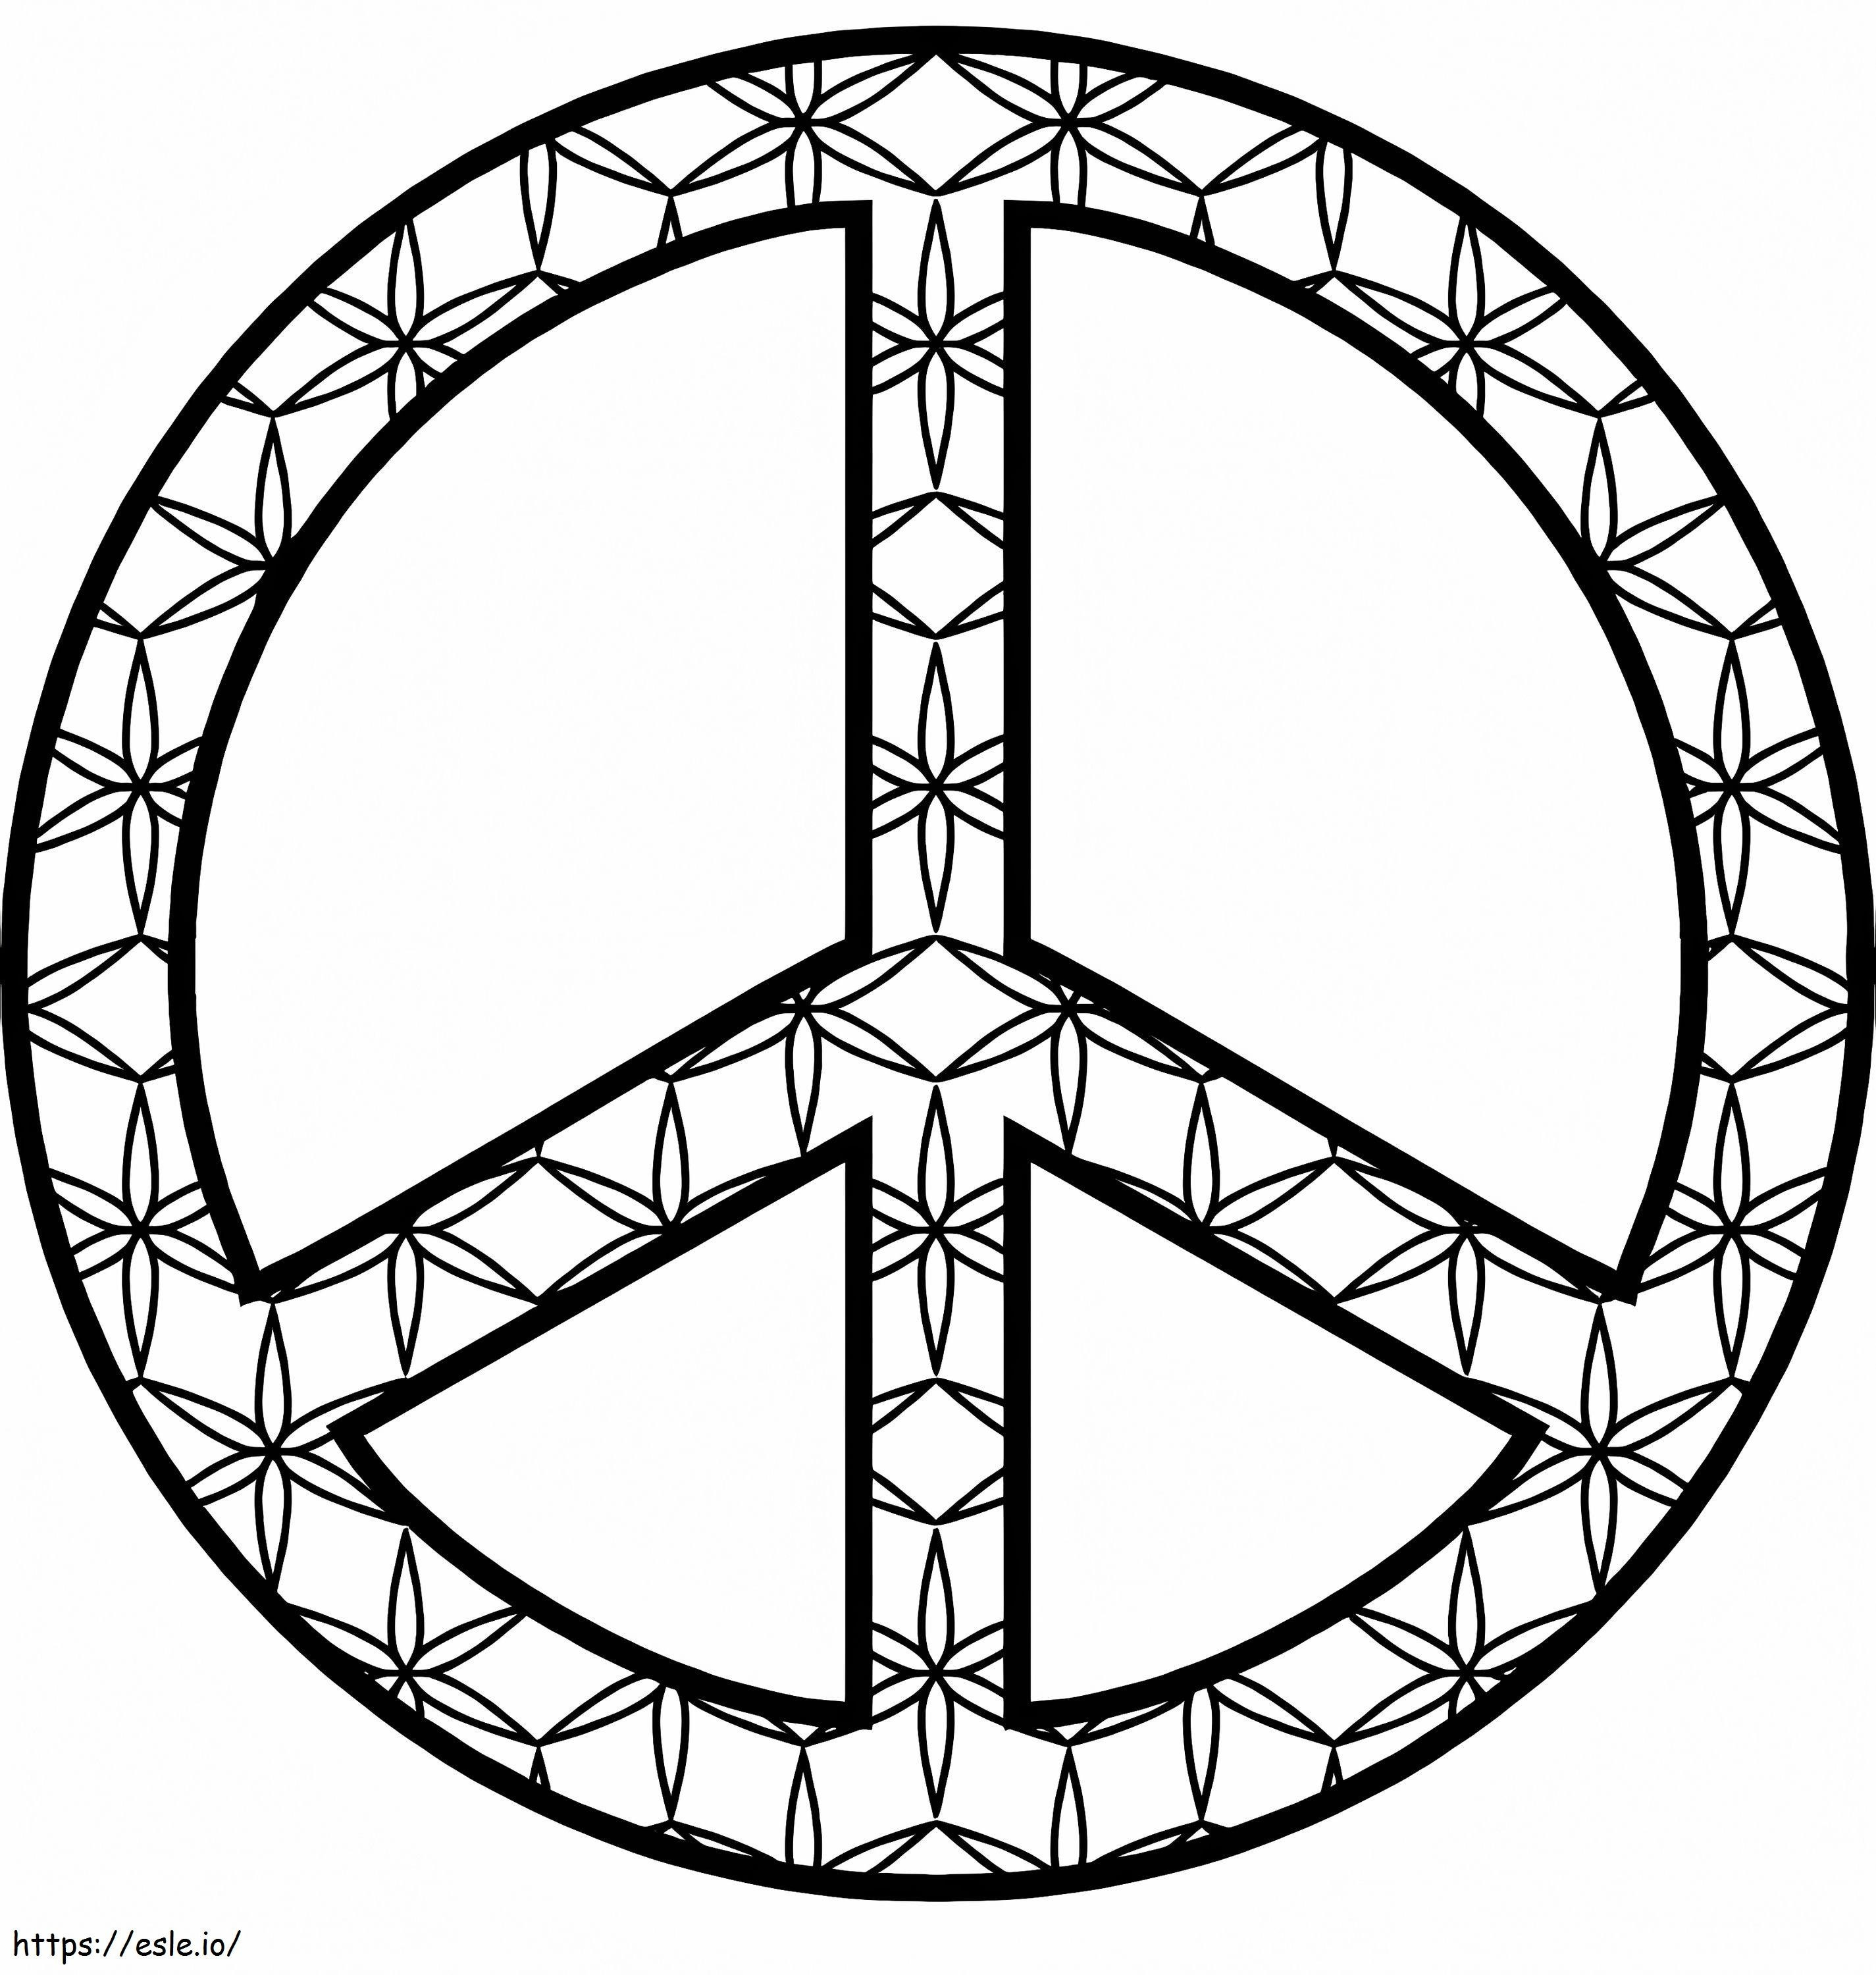 Awesome Peace Sign coloring page